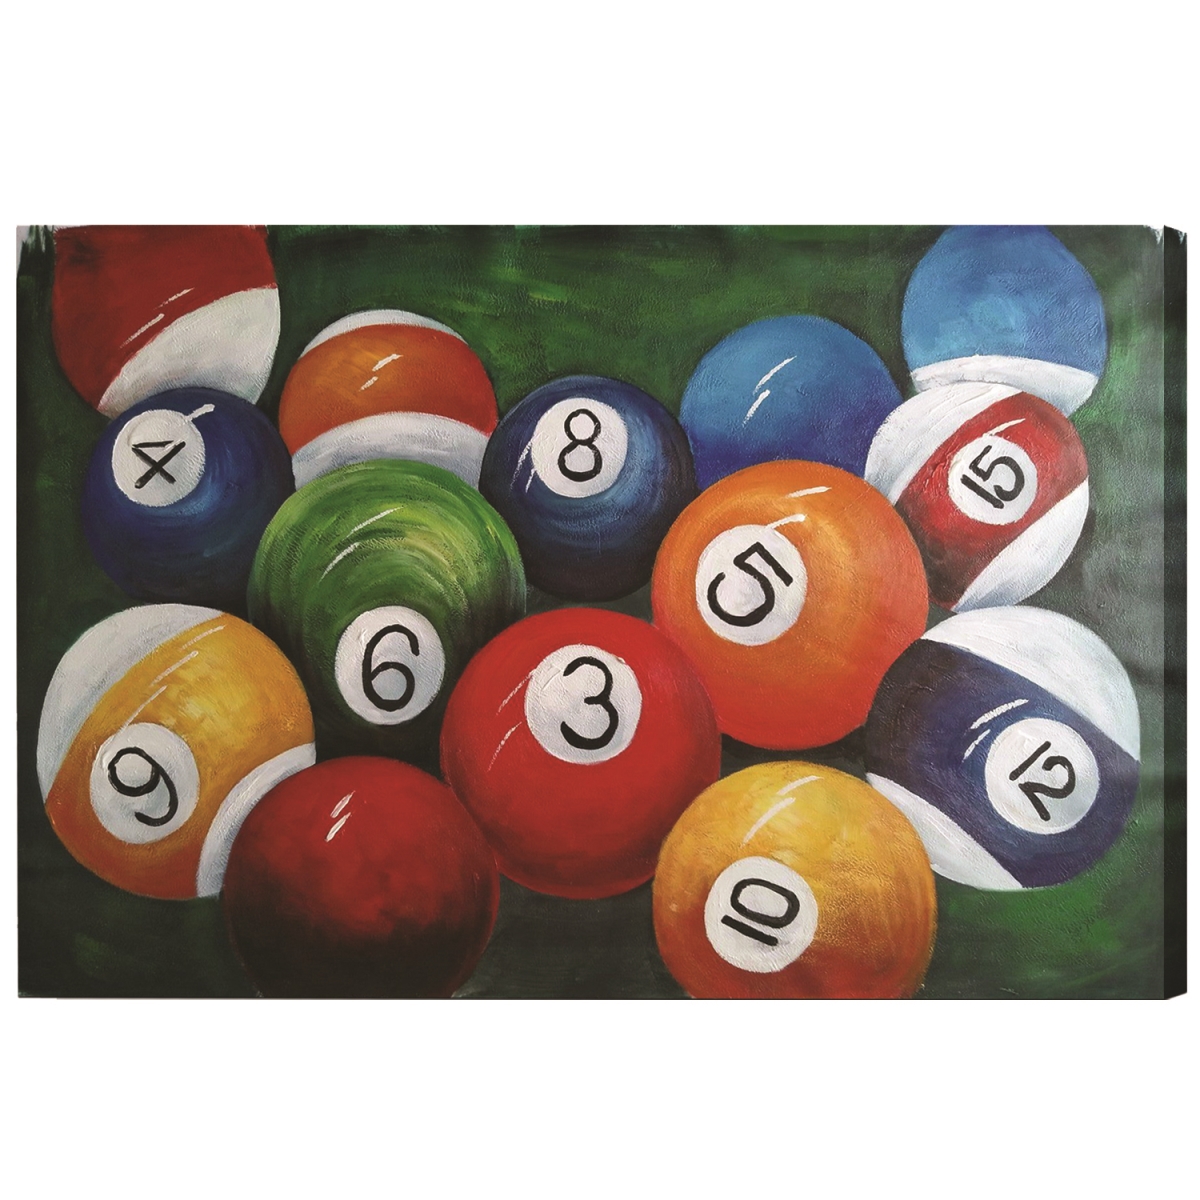 Picture of RAM Game Room OP11 36 x 24 in. Billiard Balls Close Up Oil Painting on Canvas